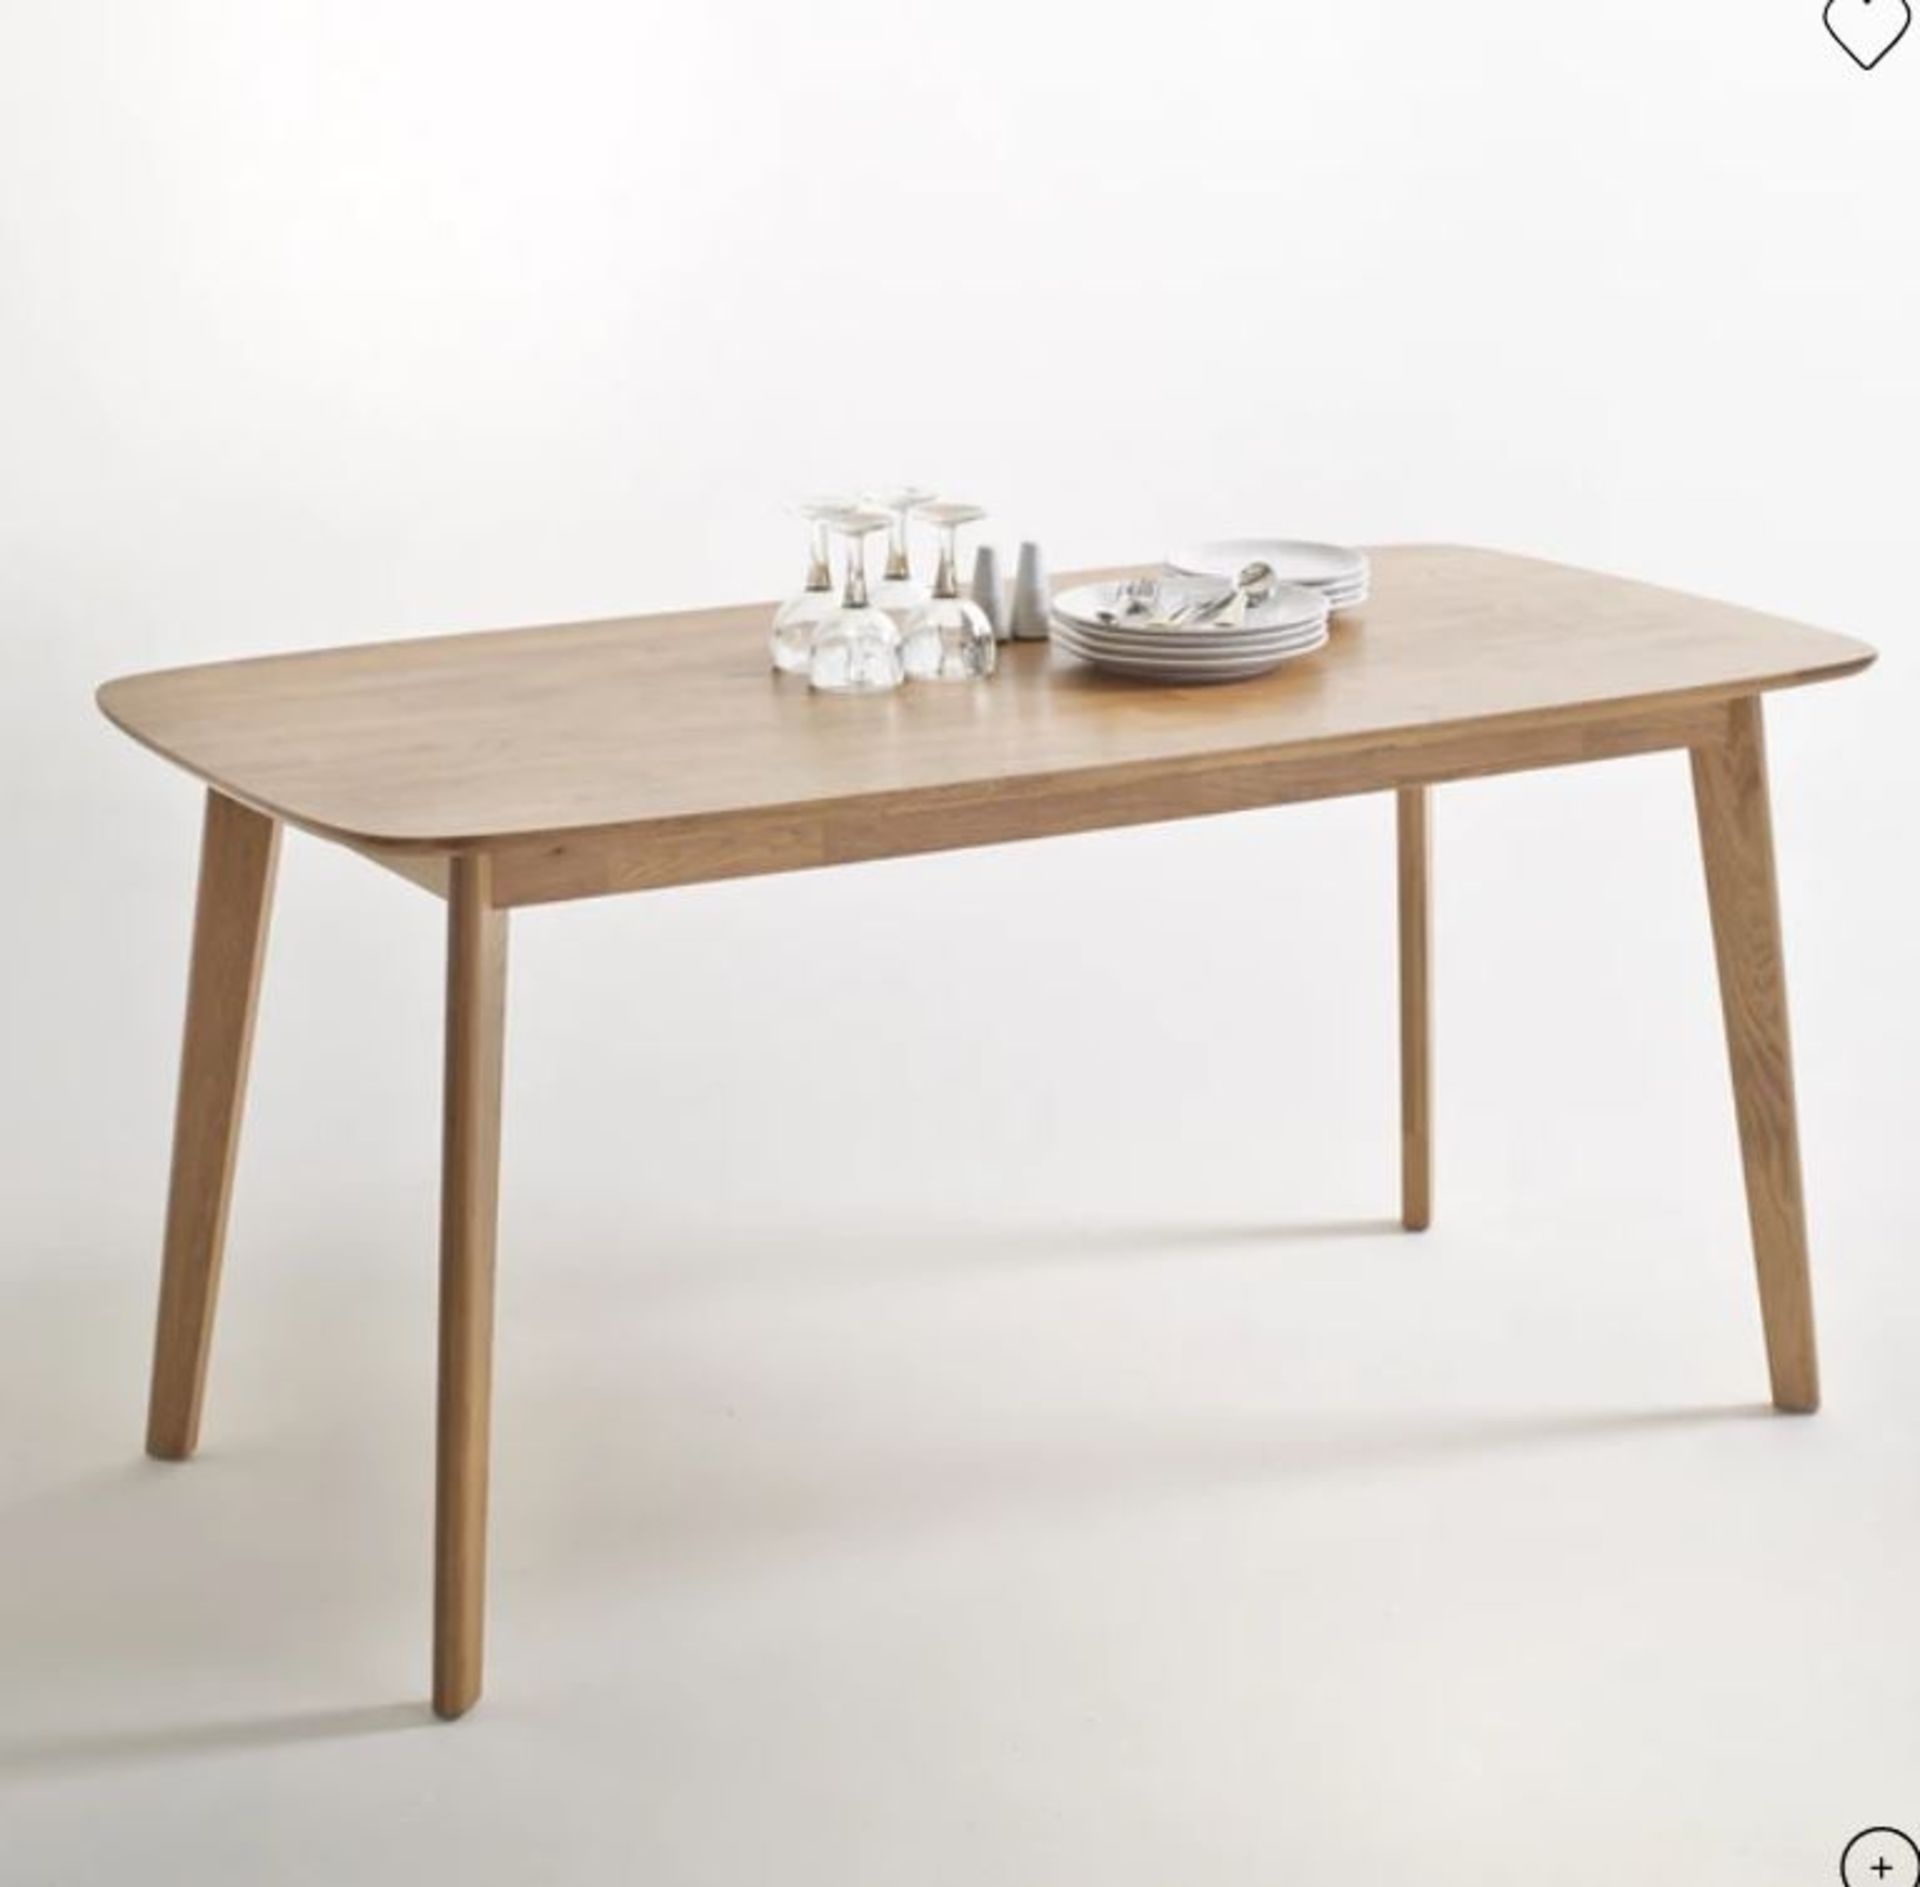 1 BOXED LA REDOUTE JIMI SOLID OAK DINING TABLE 6 SEATER / RRP £375.00, PLEASE NOTE THIS LISTING IS - Image 2 of 2